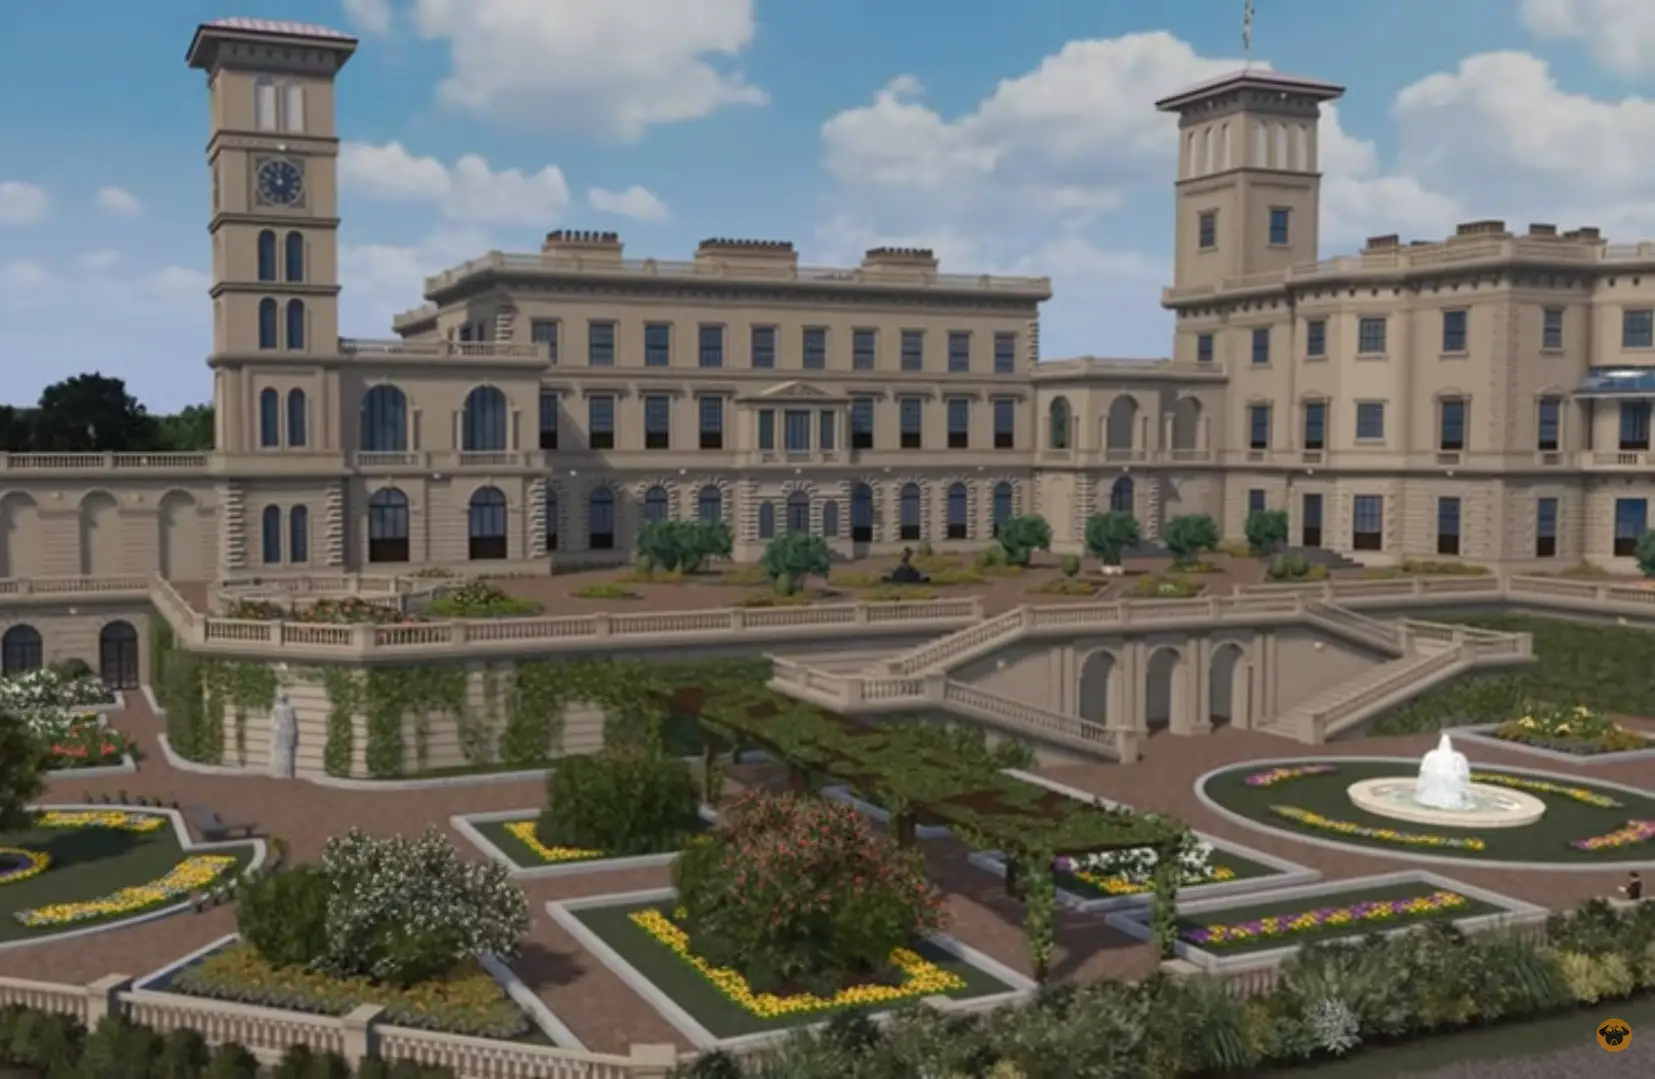 Isle of Wight in video game by PugGaming - This Osborne House